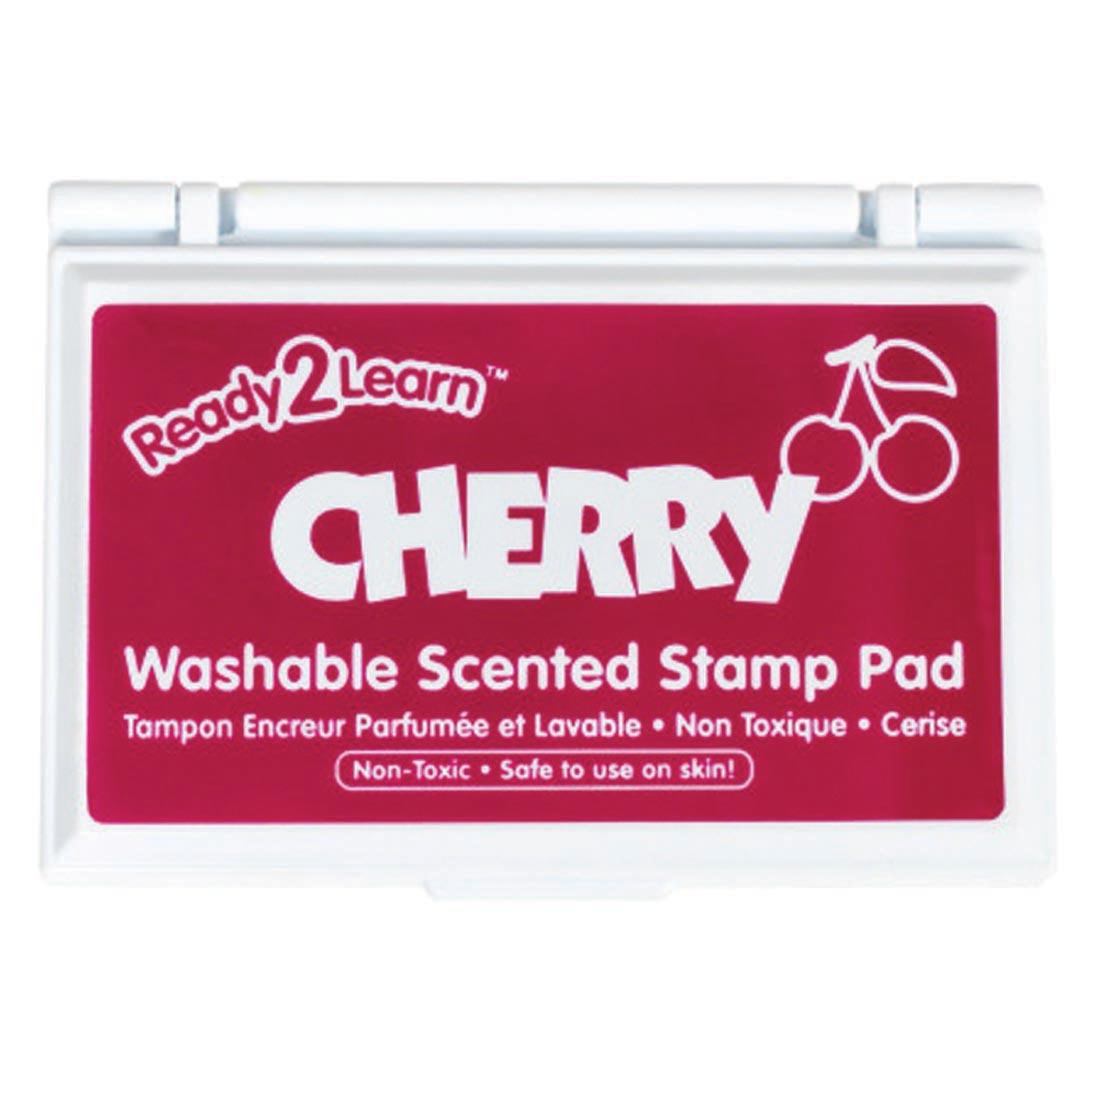 Ready 2 Learn Cherry Scented Washable Stamp Pad